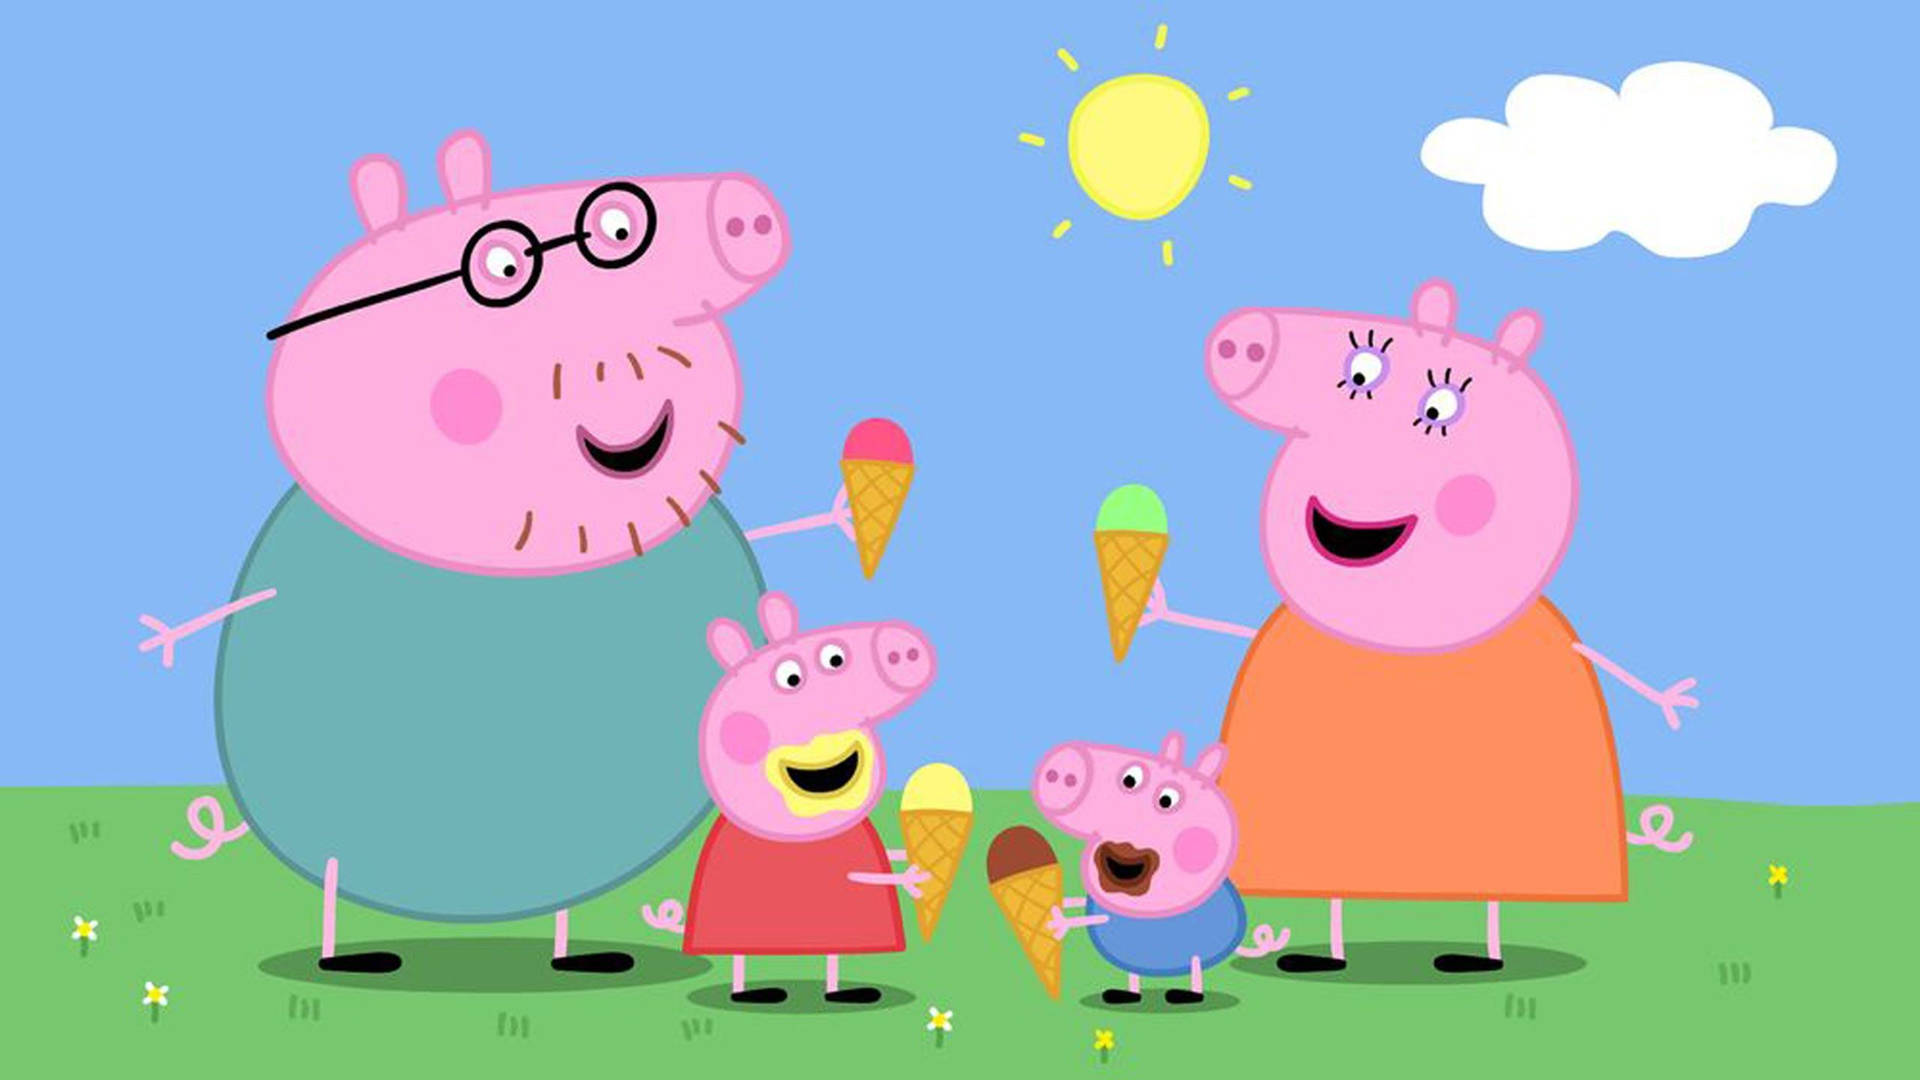 Peppa Pig always loves to bond with her family over her favourite snack - ice cream! Wallpaper